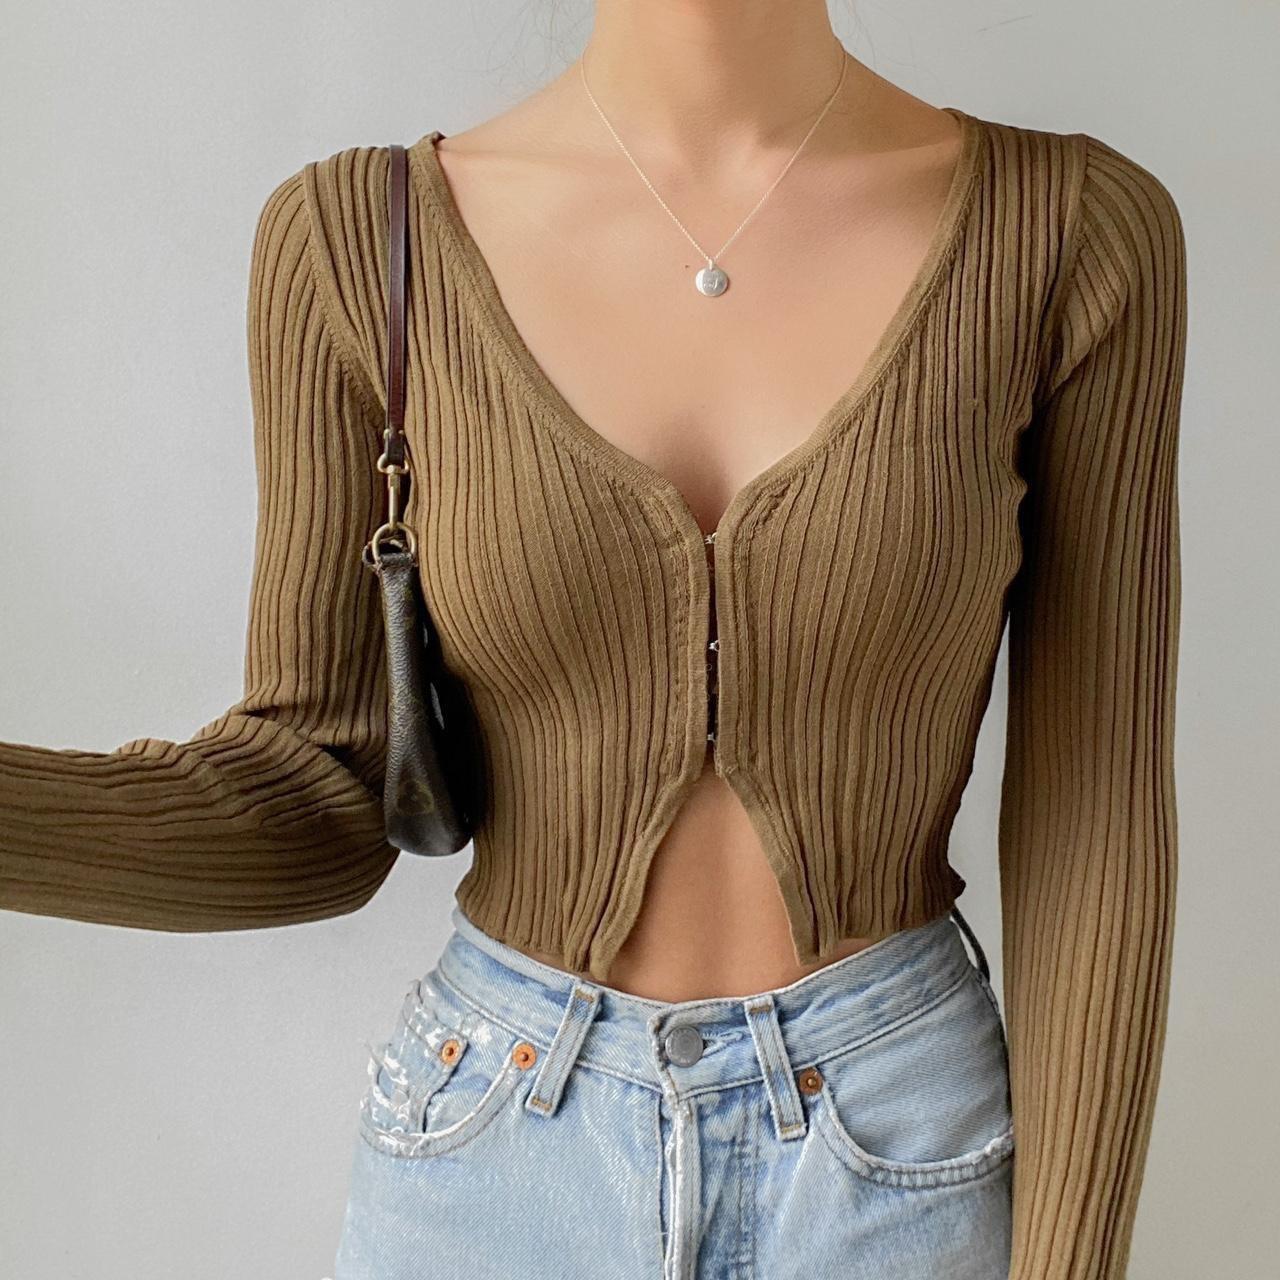 Urban Outfitters MELODY HOOK AND EYE CROP TOP Multiple / no